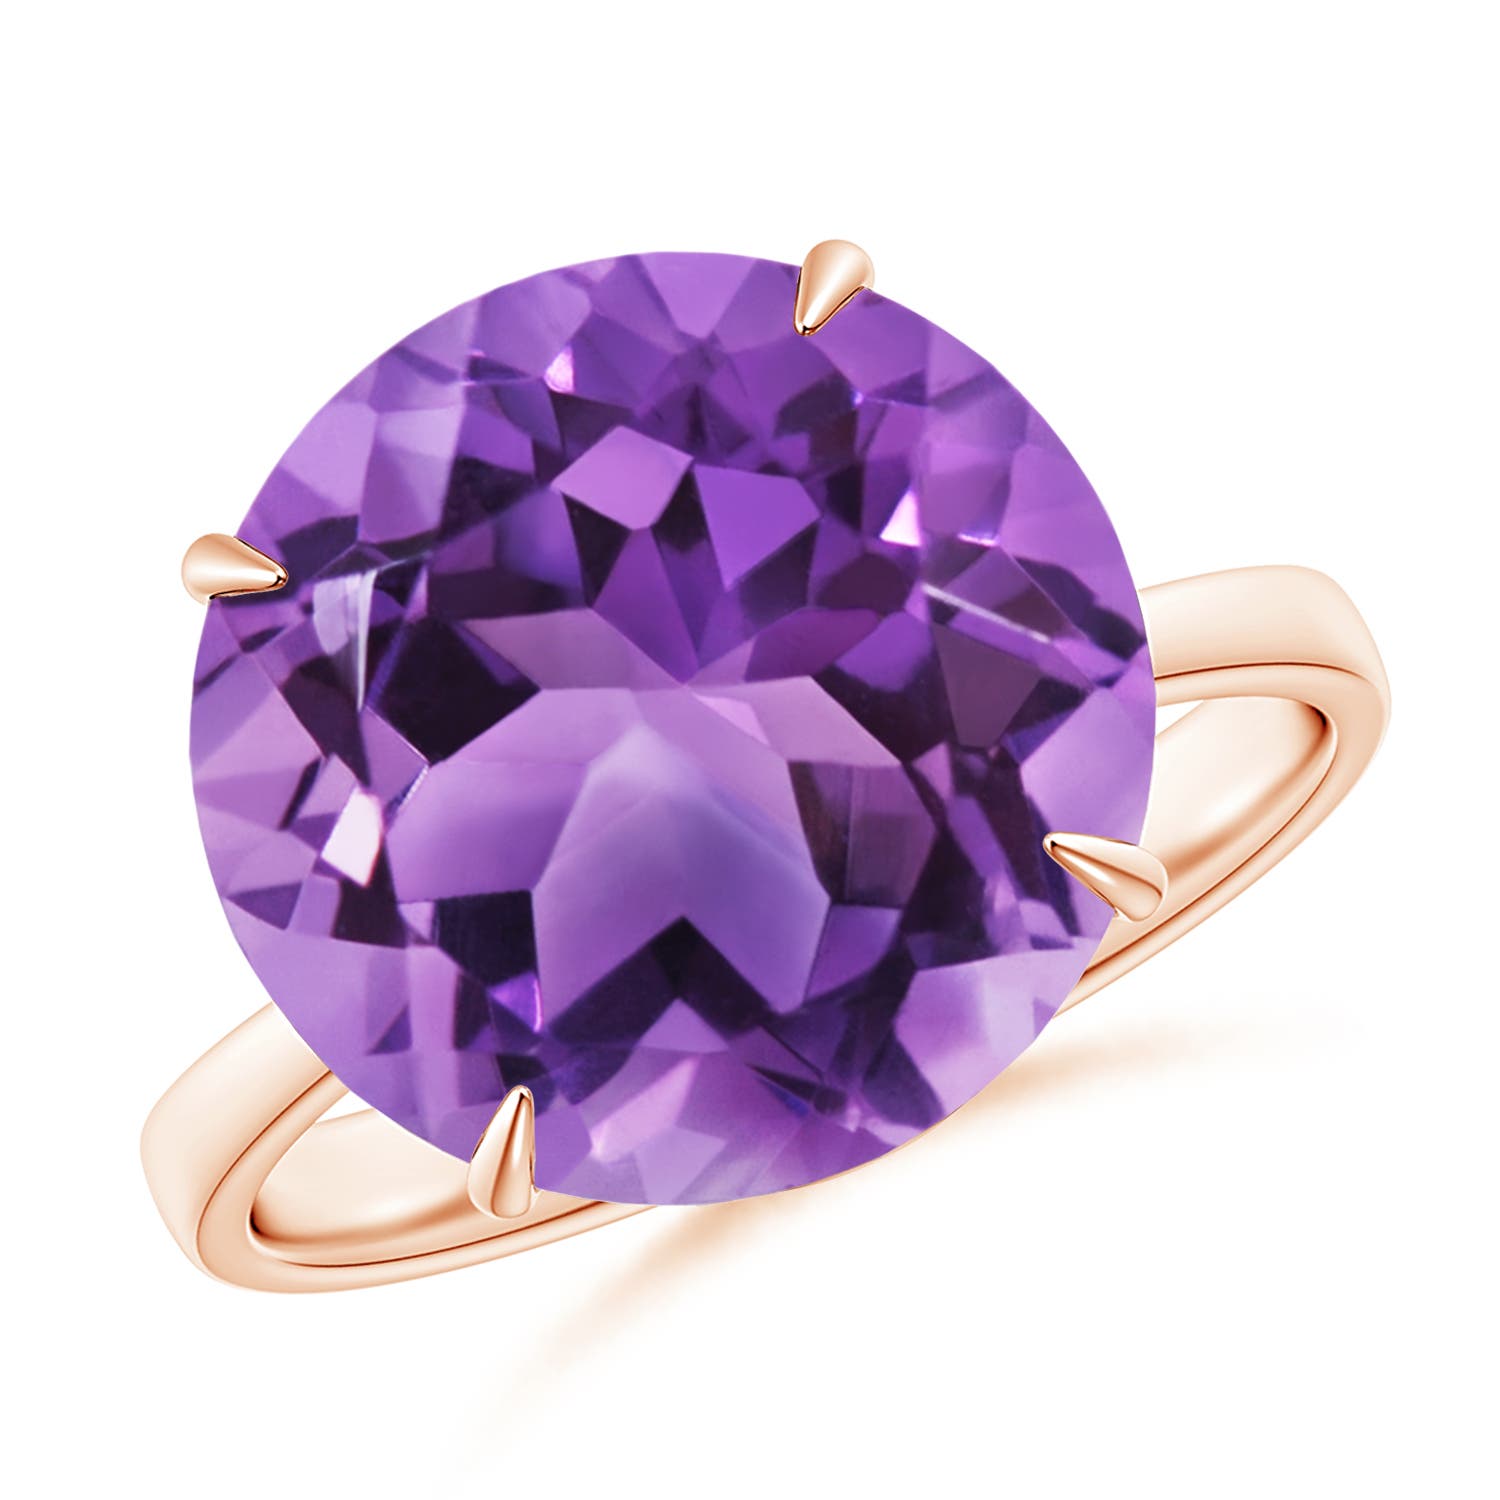 AA - Amethyst / 7.2 CT / 14 KT Rose Gold